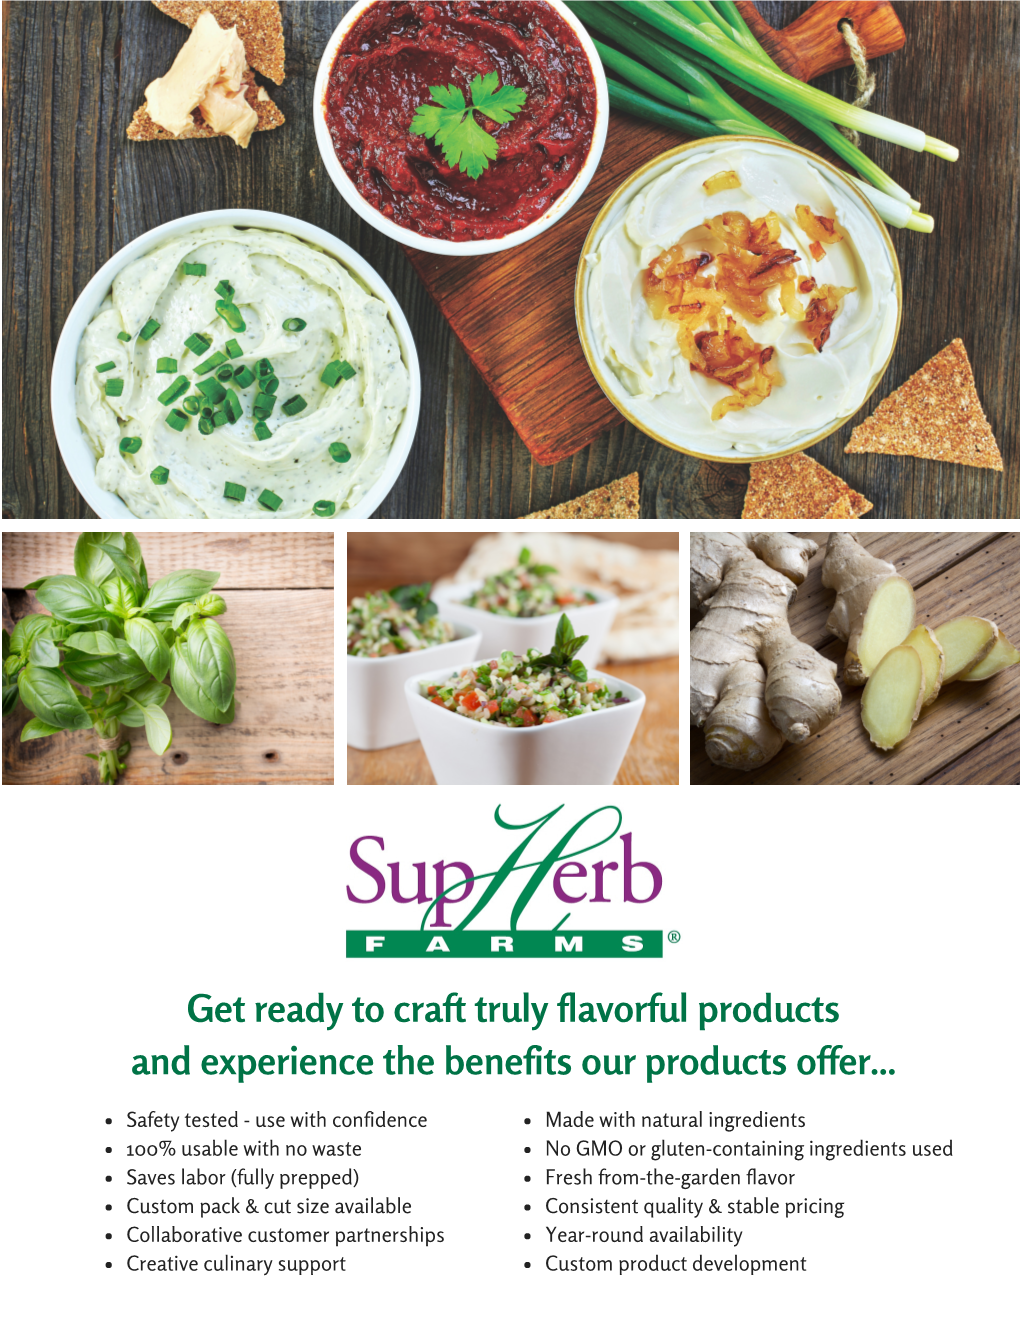 Get Ready to Craft Truly Flavorful Products and Experience the Benefits Our Products Offer